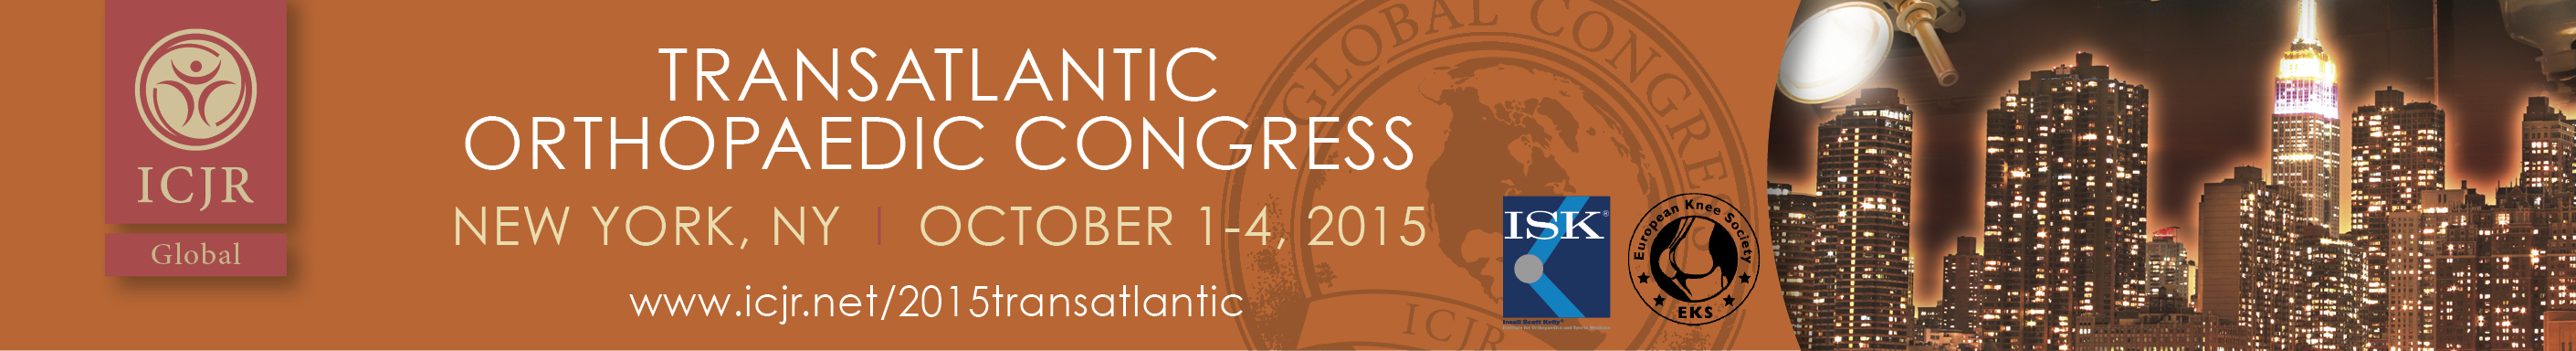 Medical, scientific and scholarly conferences: ICJR - International Congress for Joint Reconstruction 2015 Transatlantic Orthopaedic Congress